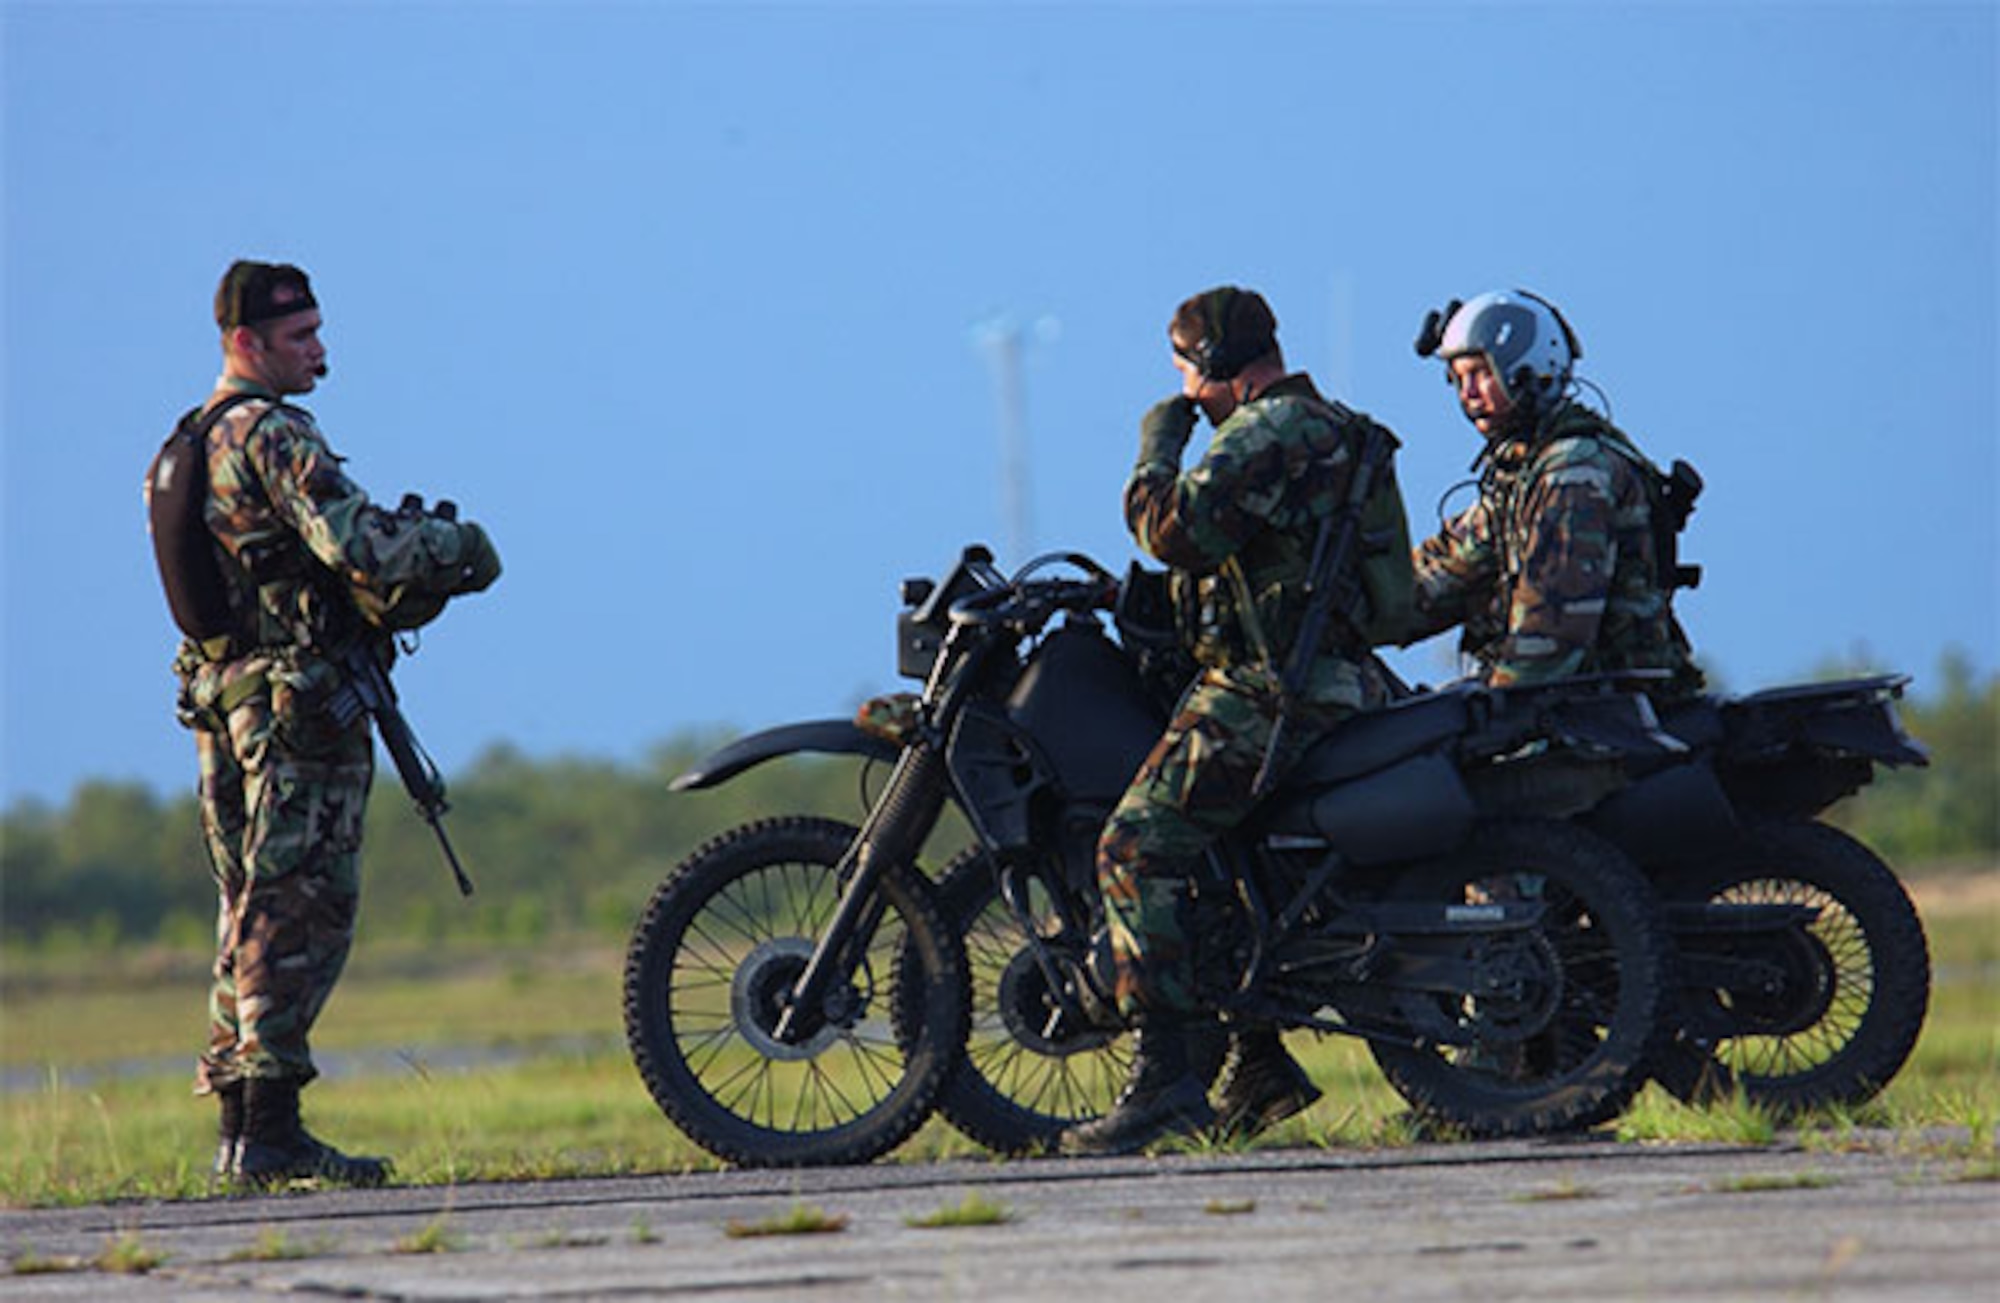 Air Force combat controller teams from the 720th Special Tactics Group sit astride their specially modified motorcycles while training at Hurlbert Field Air Force Base, Florida. The motorcycle’s military heritage began in World War I and has continued throughout military history. (Air Force photo/Lt. Gabe Johnson)